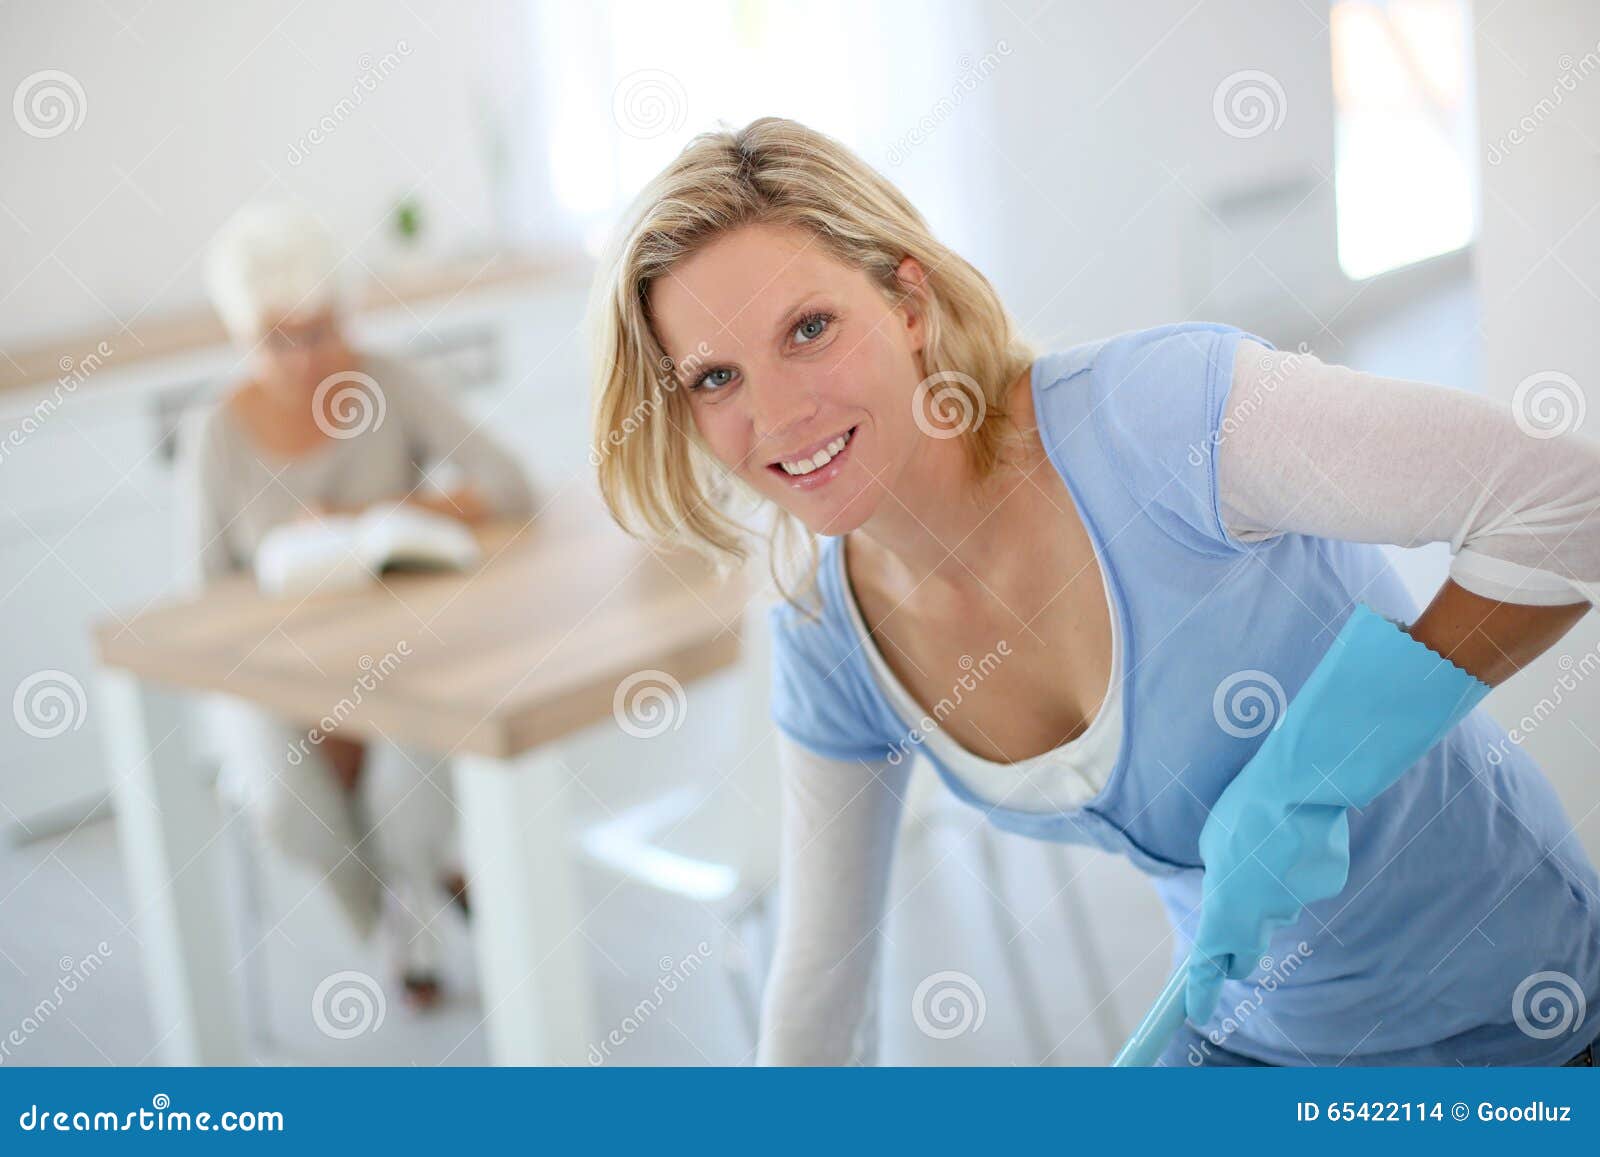 young housekeeper cleaning home